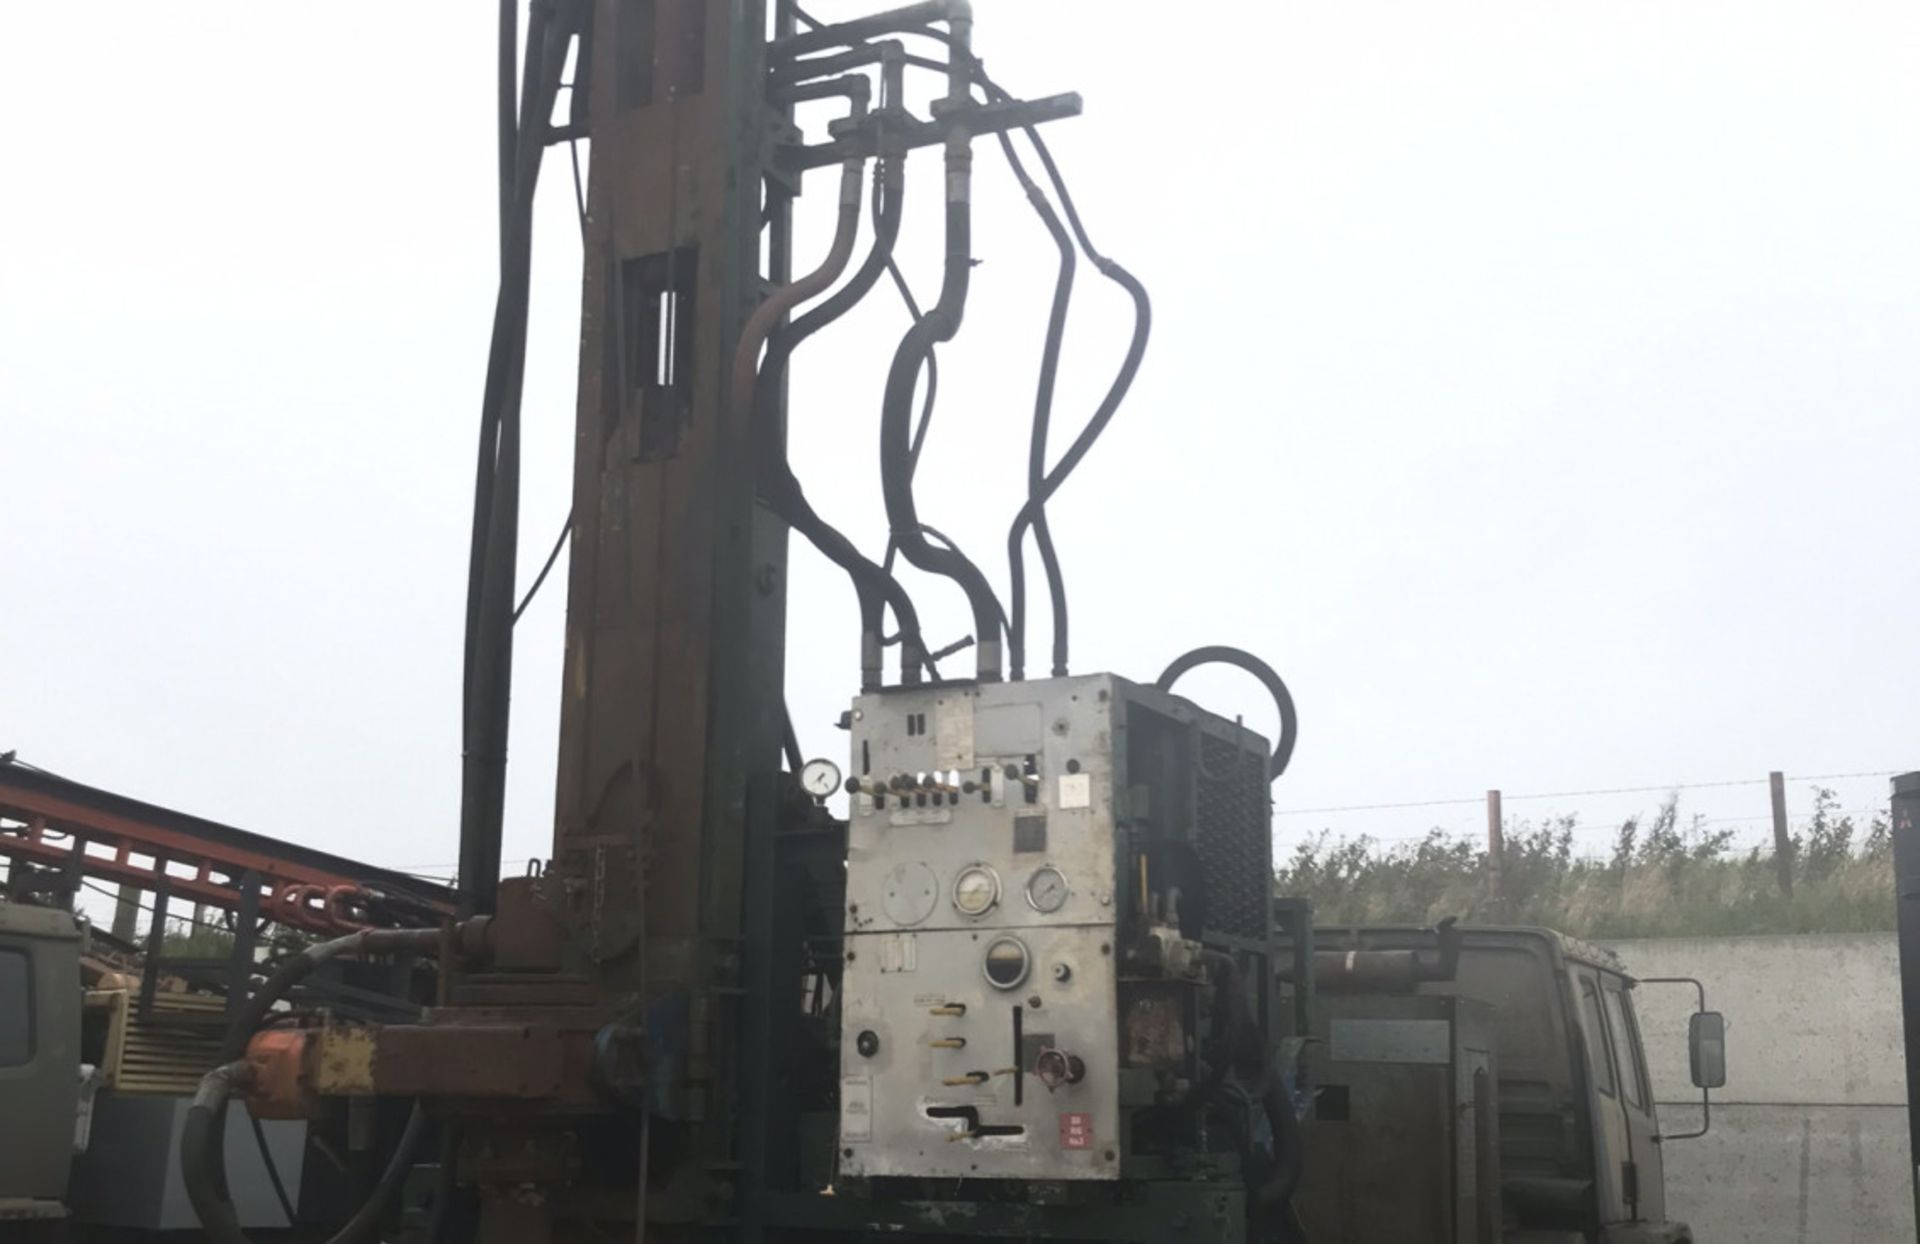 DAF 4×4 DANDO WATER WELL DRILL RIG - Image 6 of 10